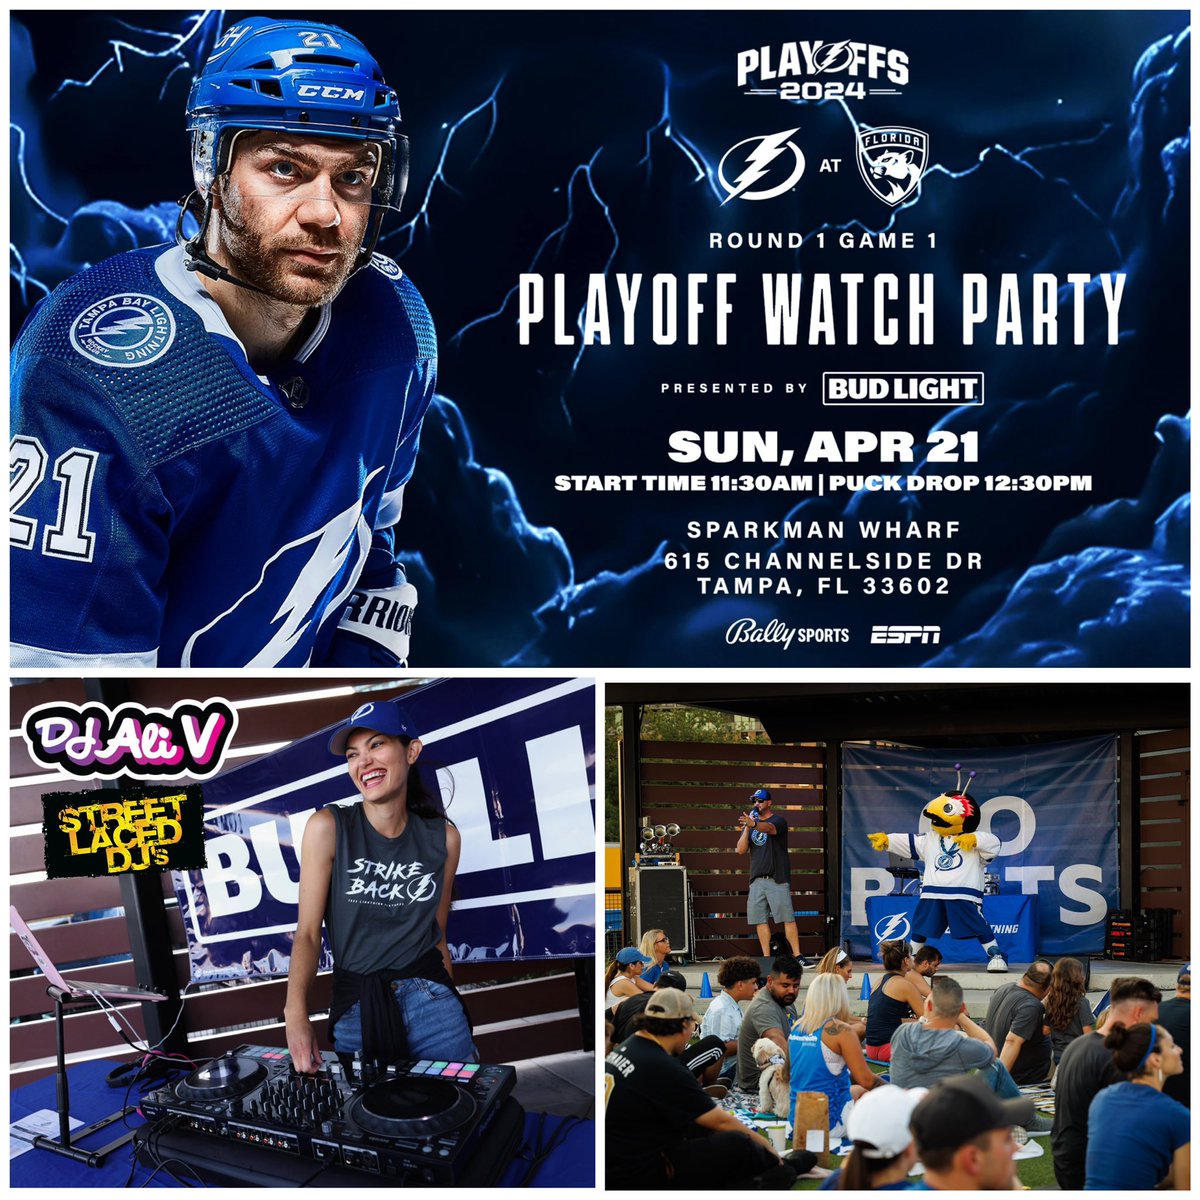 It’s GO TIME, BoltsNation⚡️
Can’t wait to rock the OFFICIAL @TBLightning @StanleyCup Playoffs Game☝🏽Round☝🏽Watch Party TOMM at @sparkmanwharf, powered by @budlight! @StreetLacedDJs own DJ Ali V on vibes, @ThunderBugTBL, #BoltsBlueCrew, @TBLRollingTHNDR, @boltsalumni & U! #GoBolts